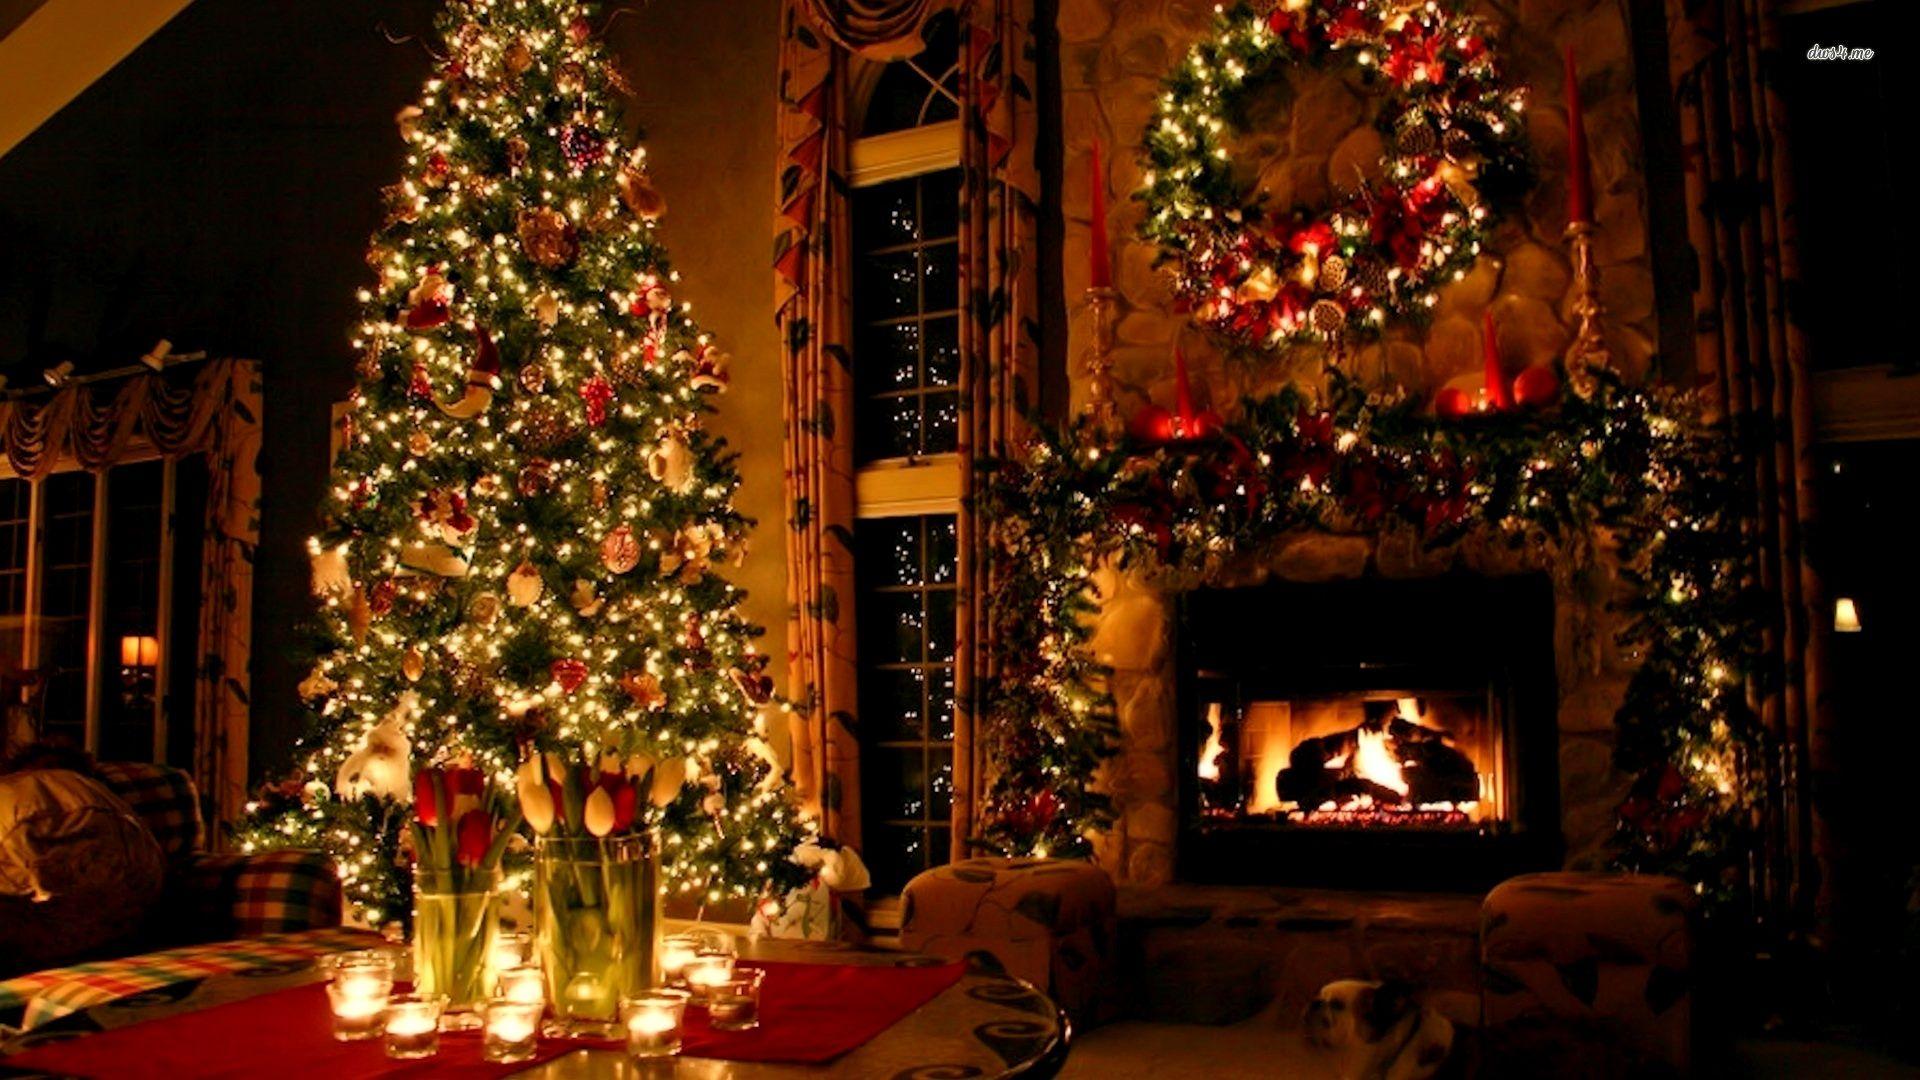 House Christmas Wallpapers - Top Free House Christmas Backgrounds ...